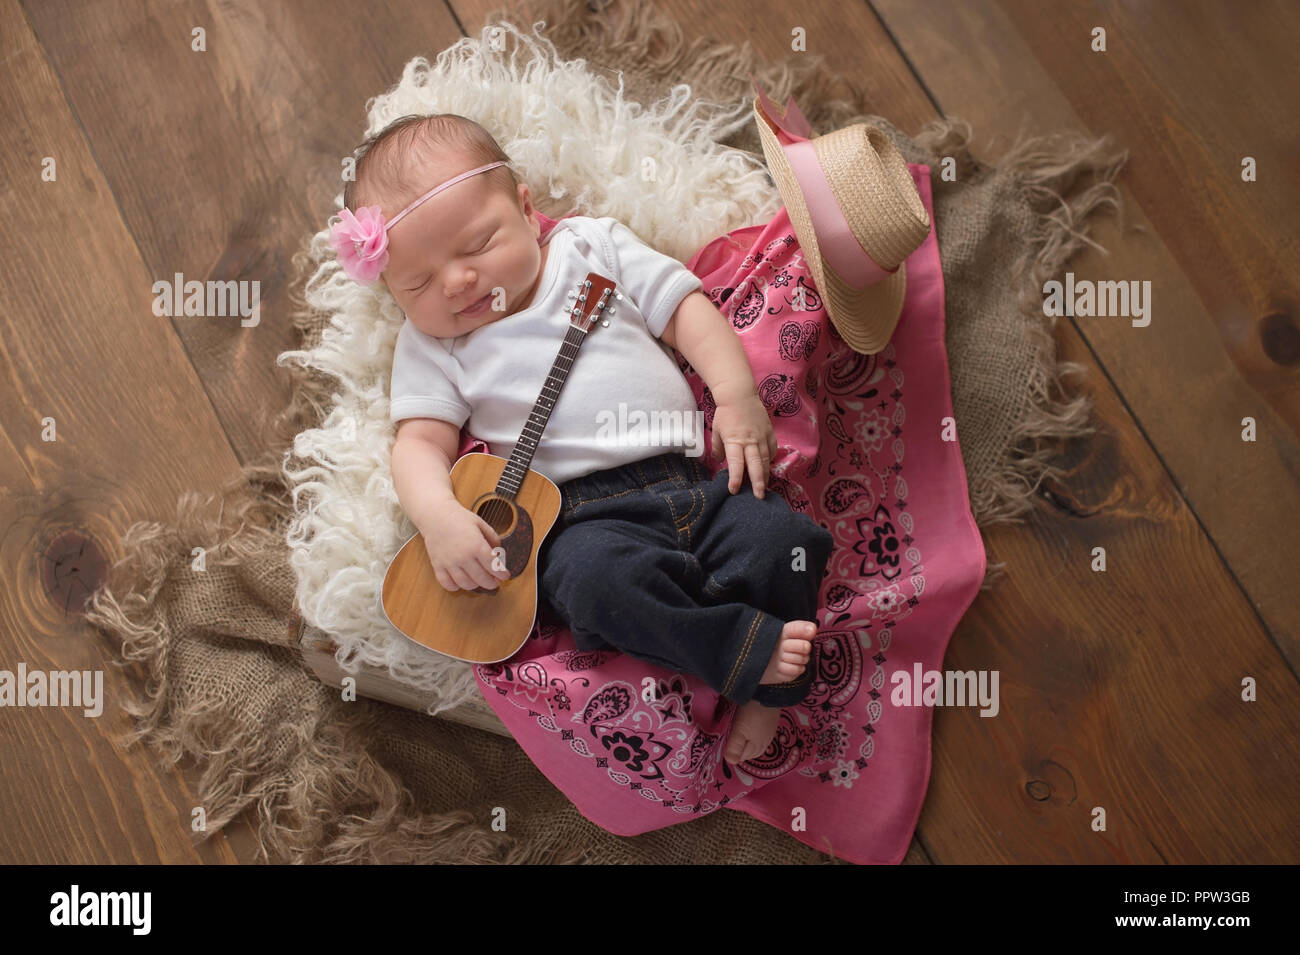 A nine day old, sleeing baby girl wearing jeans and holding a tiny acoustic guitar. She is lying in a wooden crate lined with sheepskin and a pink ban Stock Photo